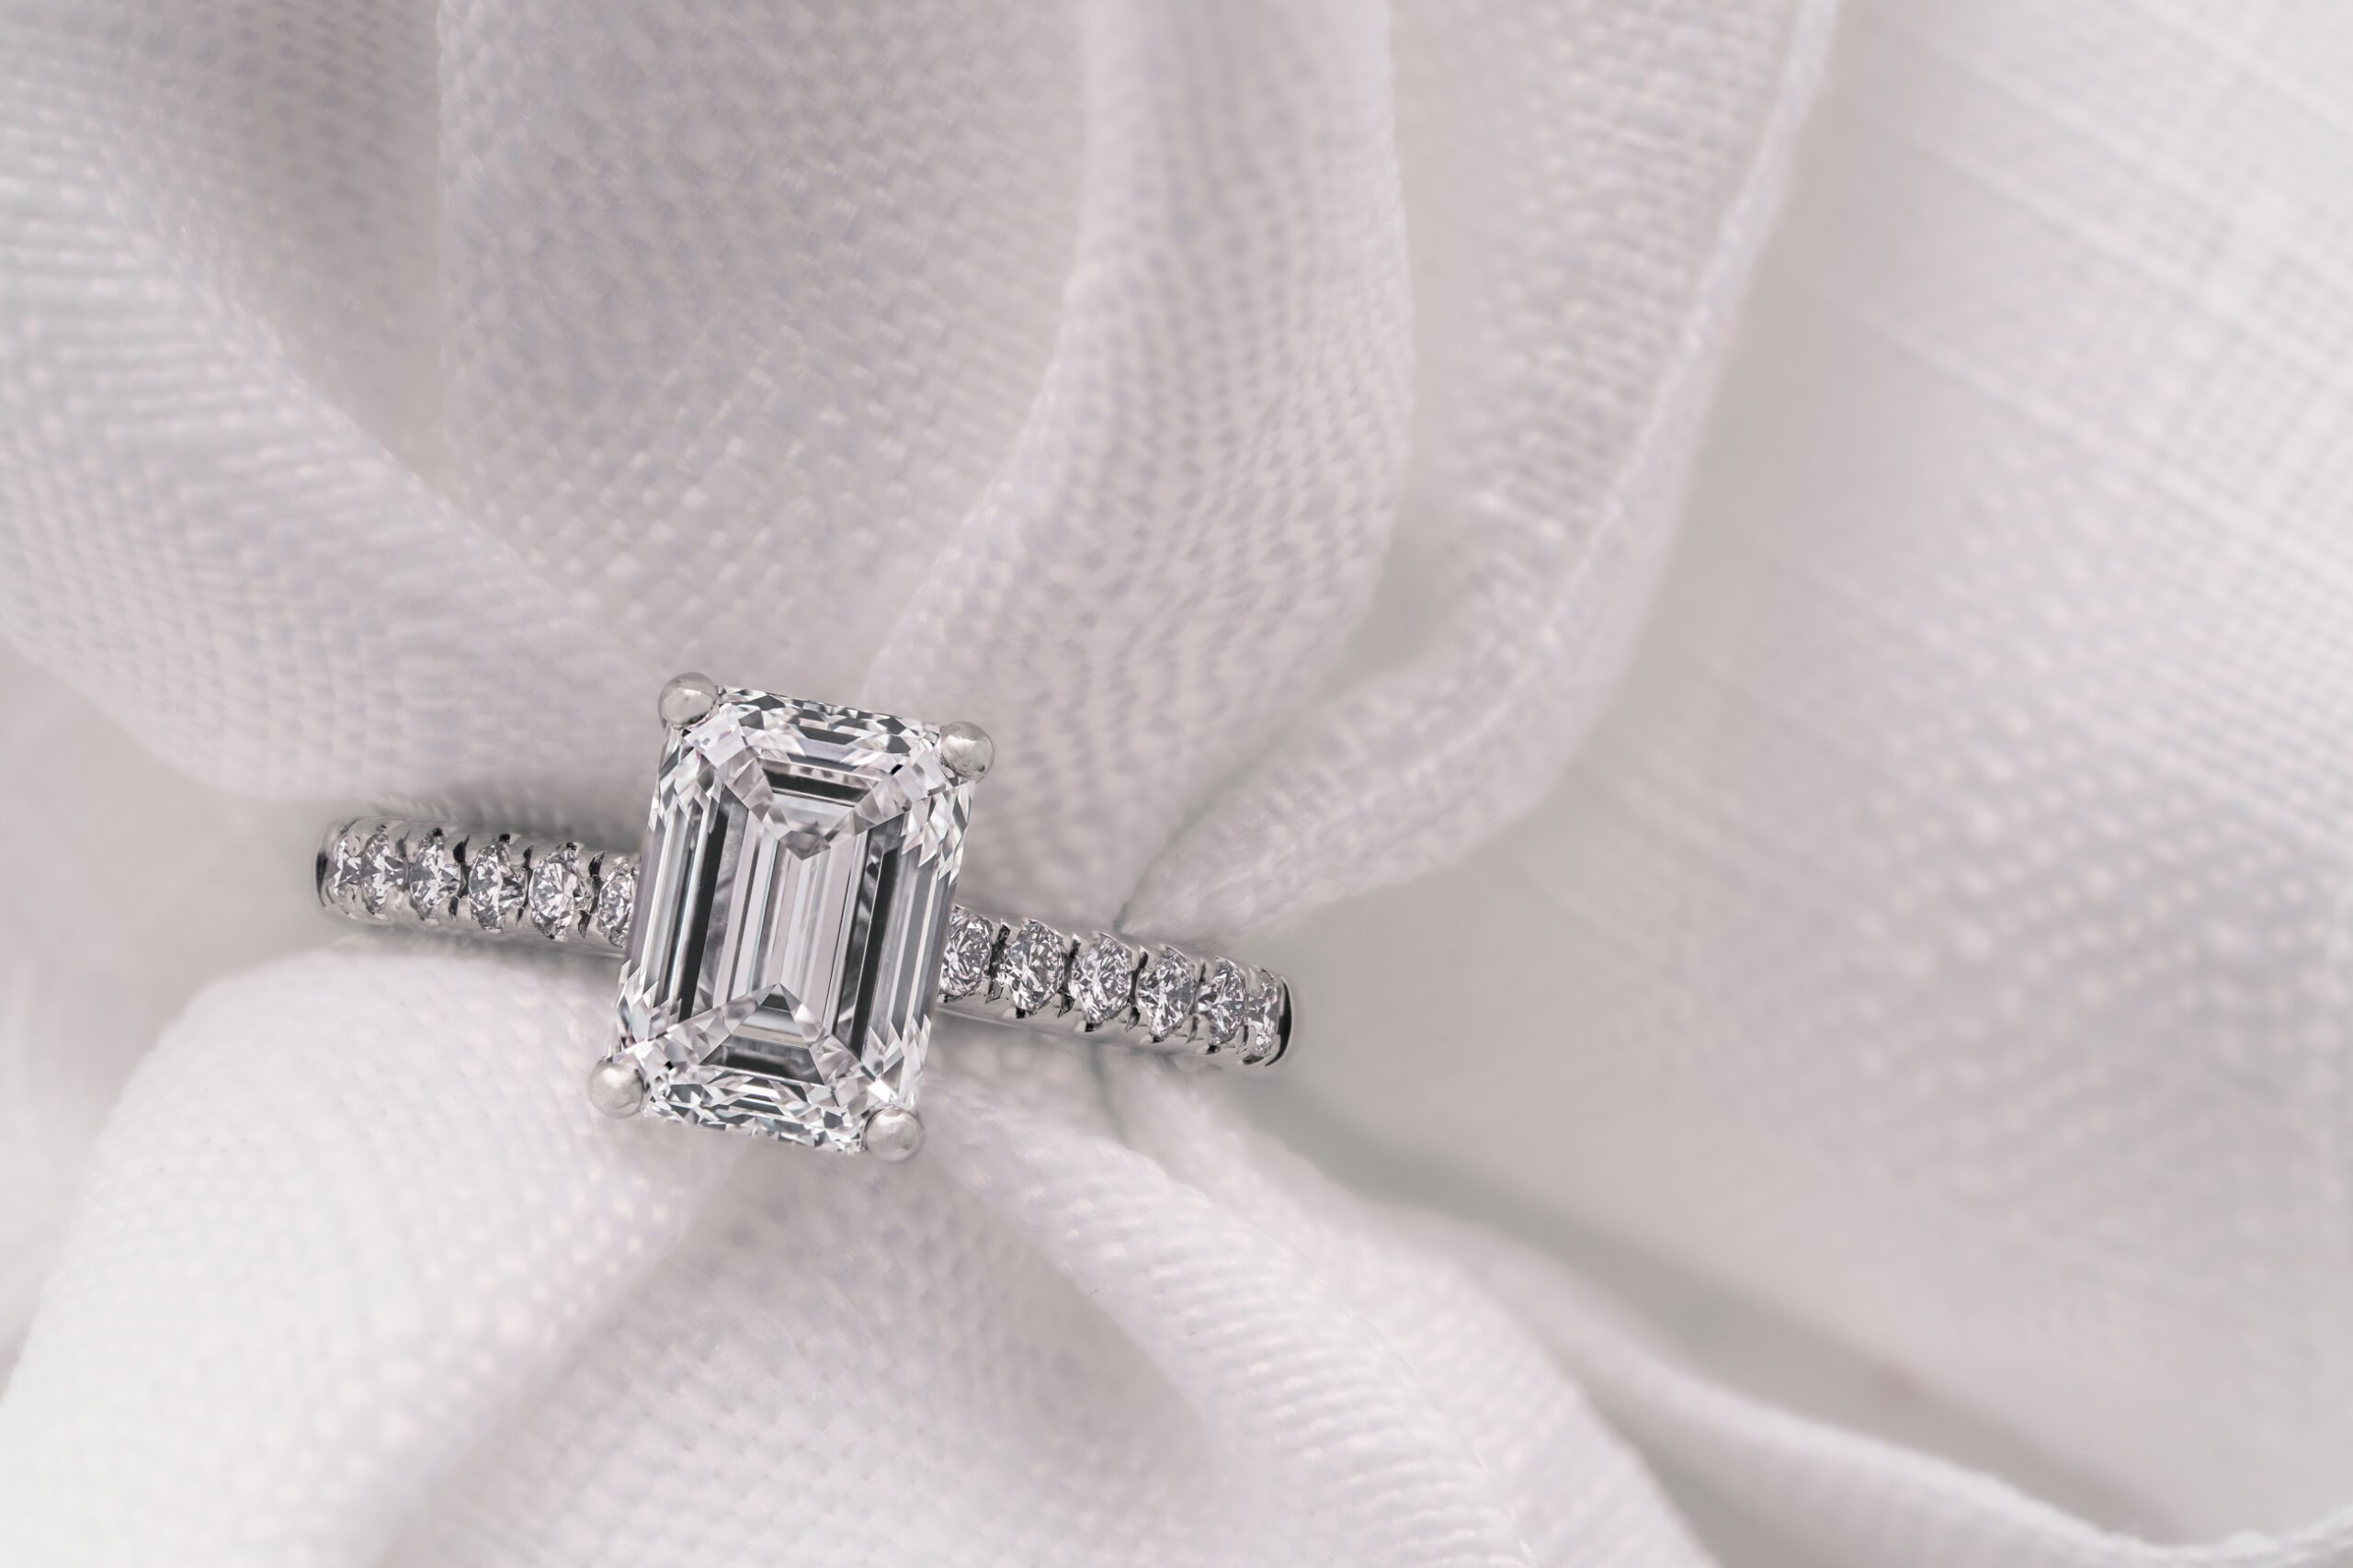 Emerald cut diamond engagement ring with diamond shoulders